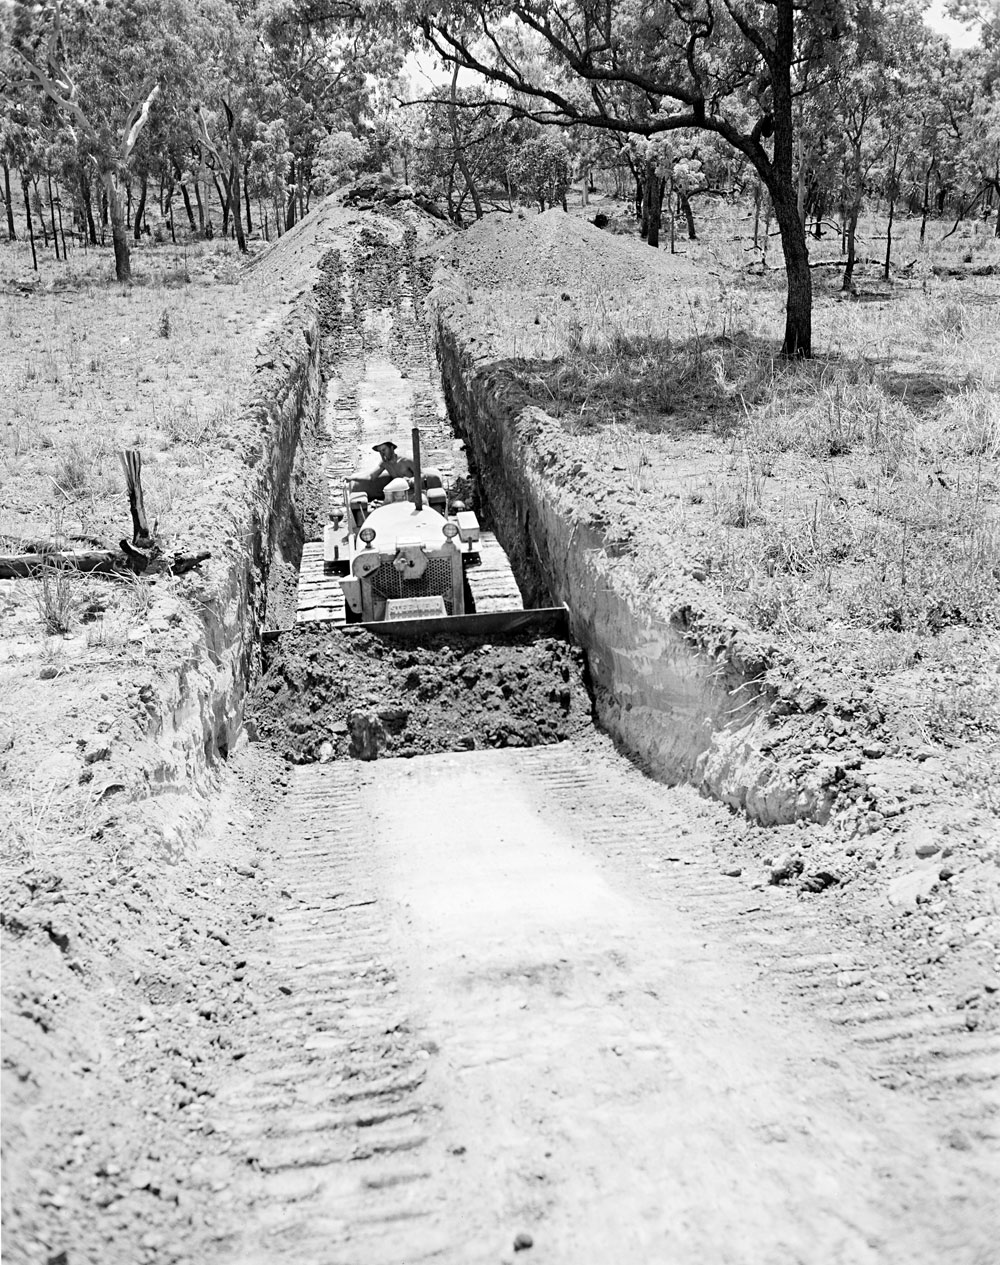   Bulldozer costeaning at Rum Jungle (1959). National Archives of Australia: A1200, L30438